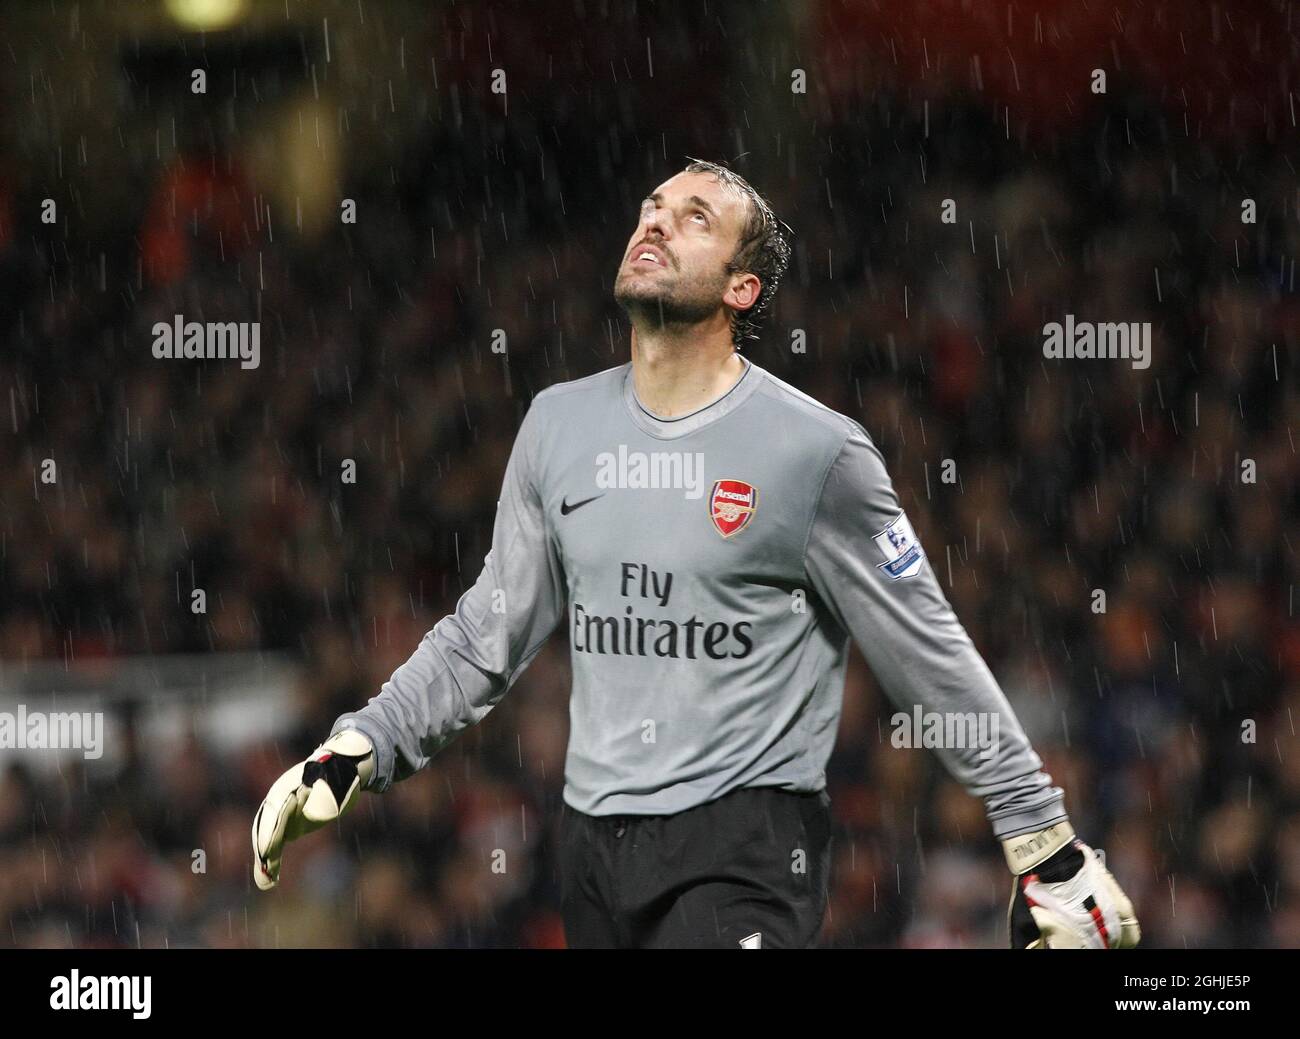 Arsenal's Manuel Almunia looks on as his side goes 2-0 down during the Barclays Premier League match between Arsenal and Chelsea at Emirates Stadium, London. Stock Photo